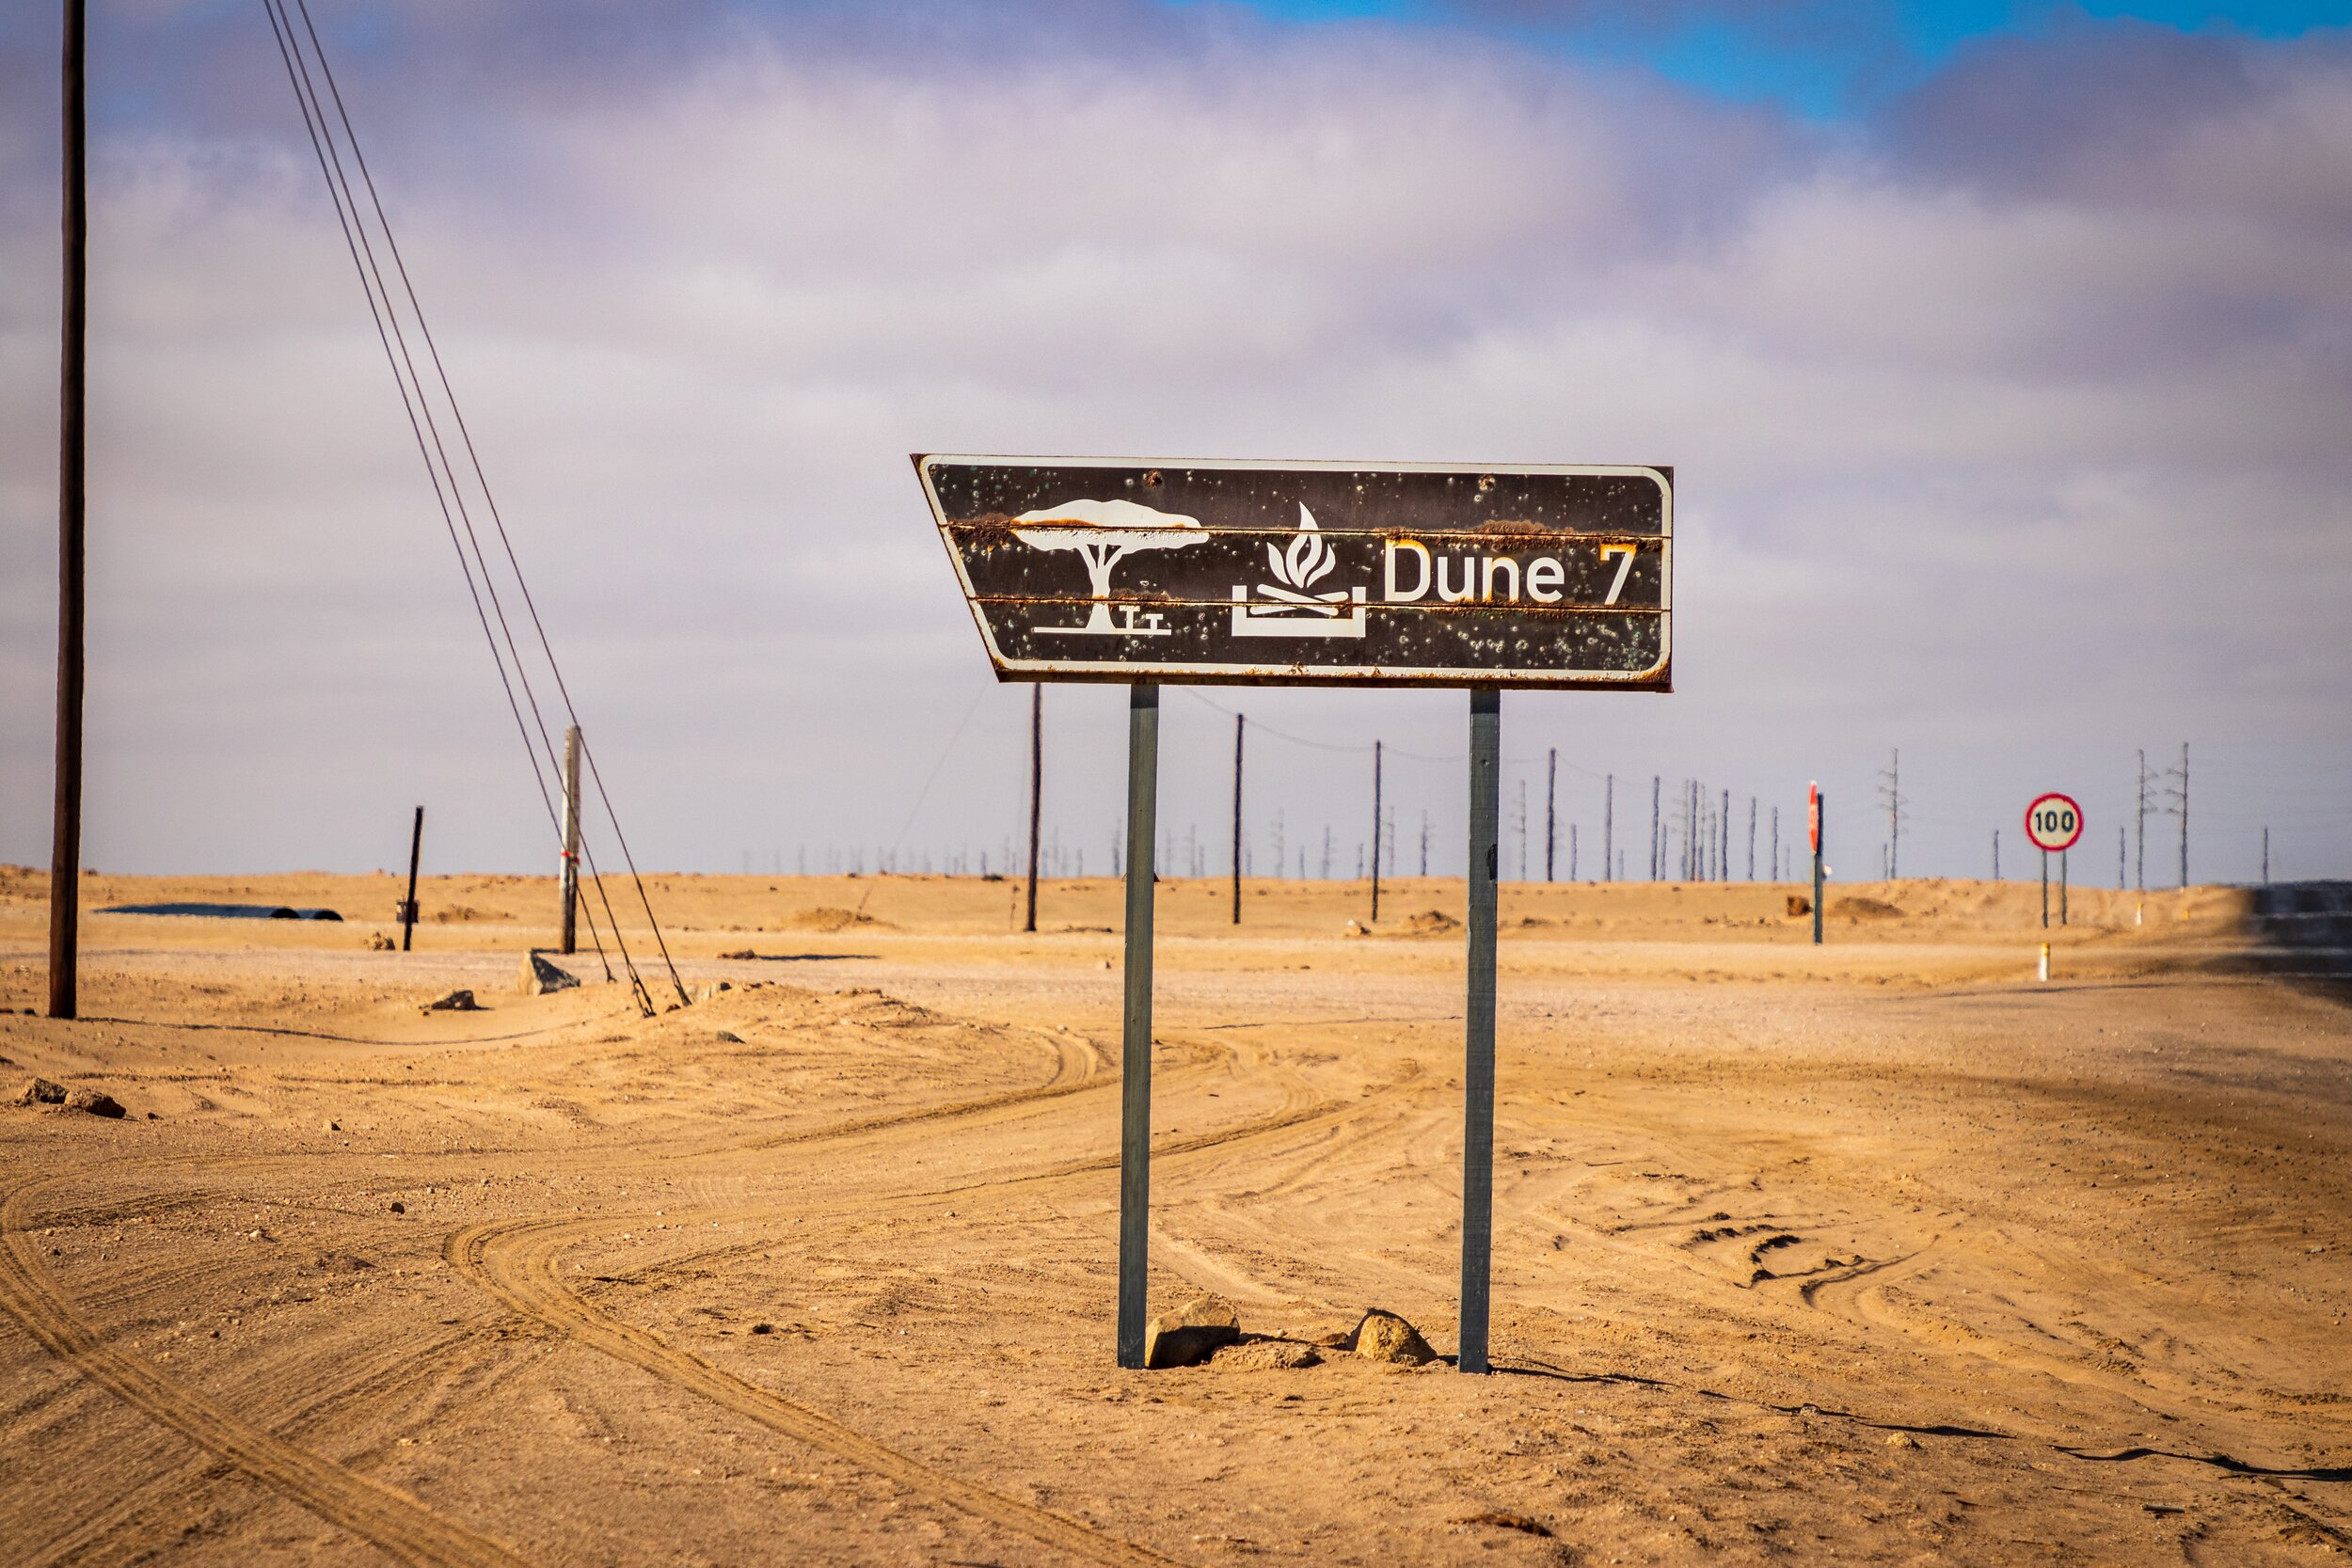 street sign displaying "dune 7" in the sand in namibia